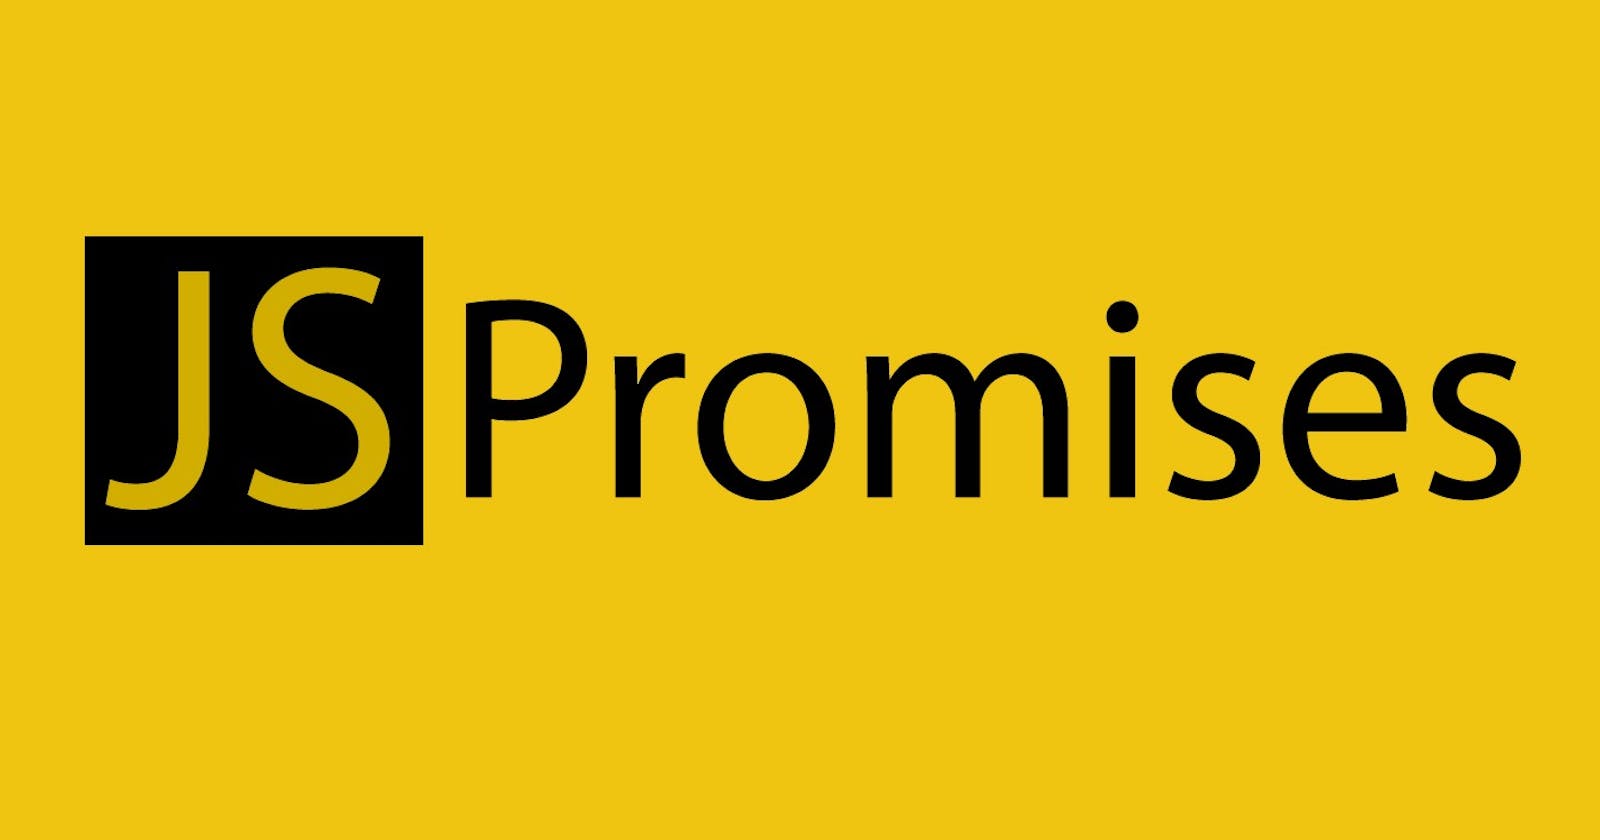 An Ultimate Guide to Javascript Promises